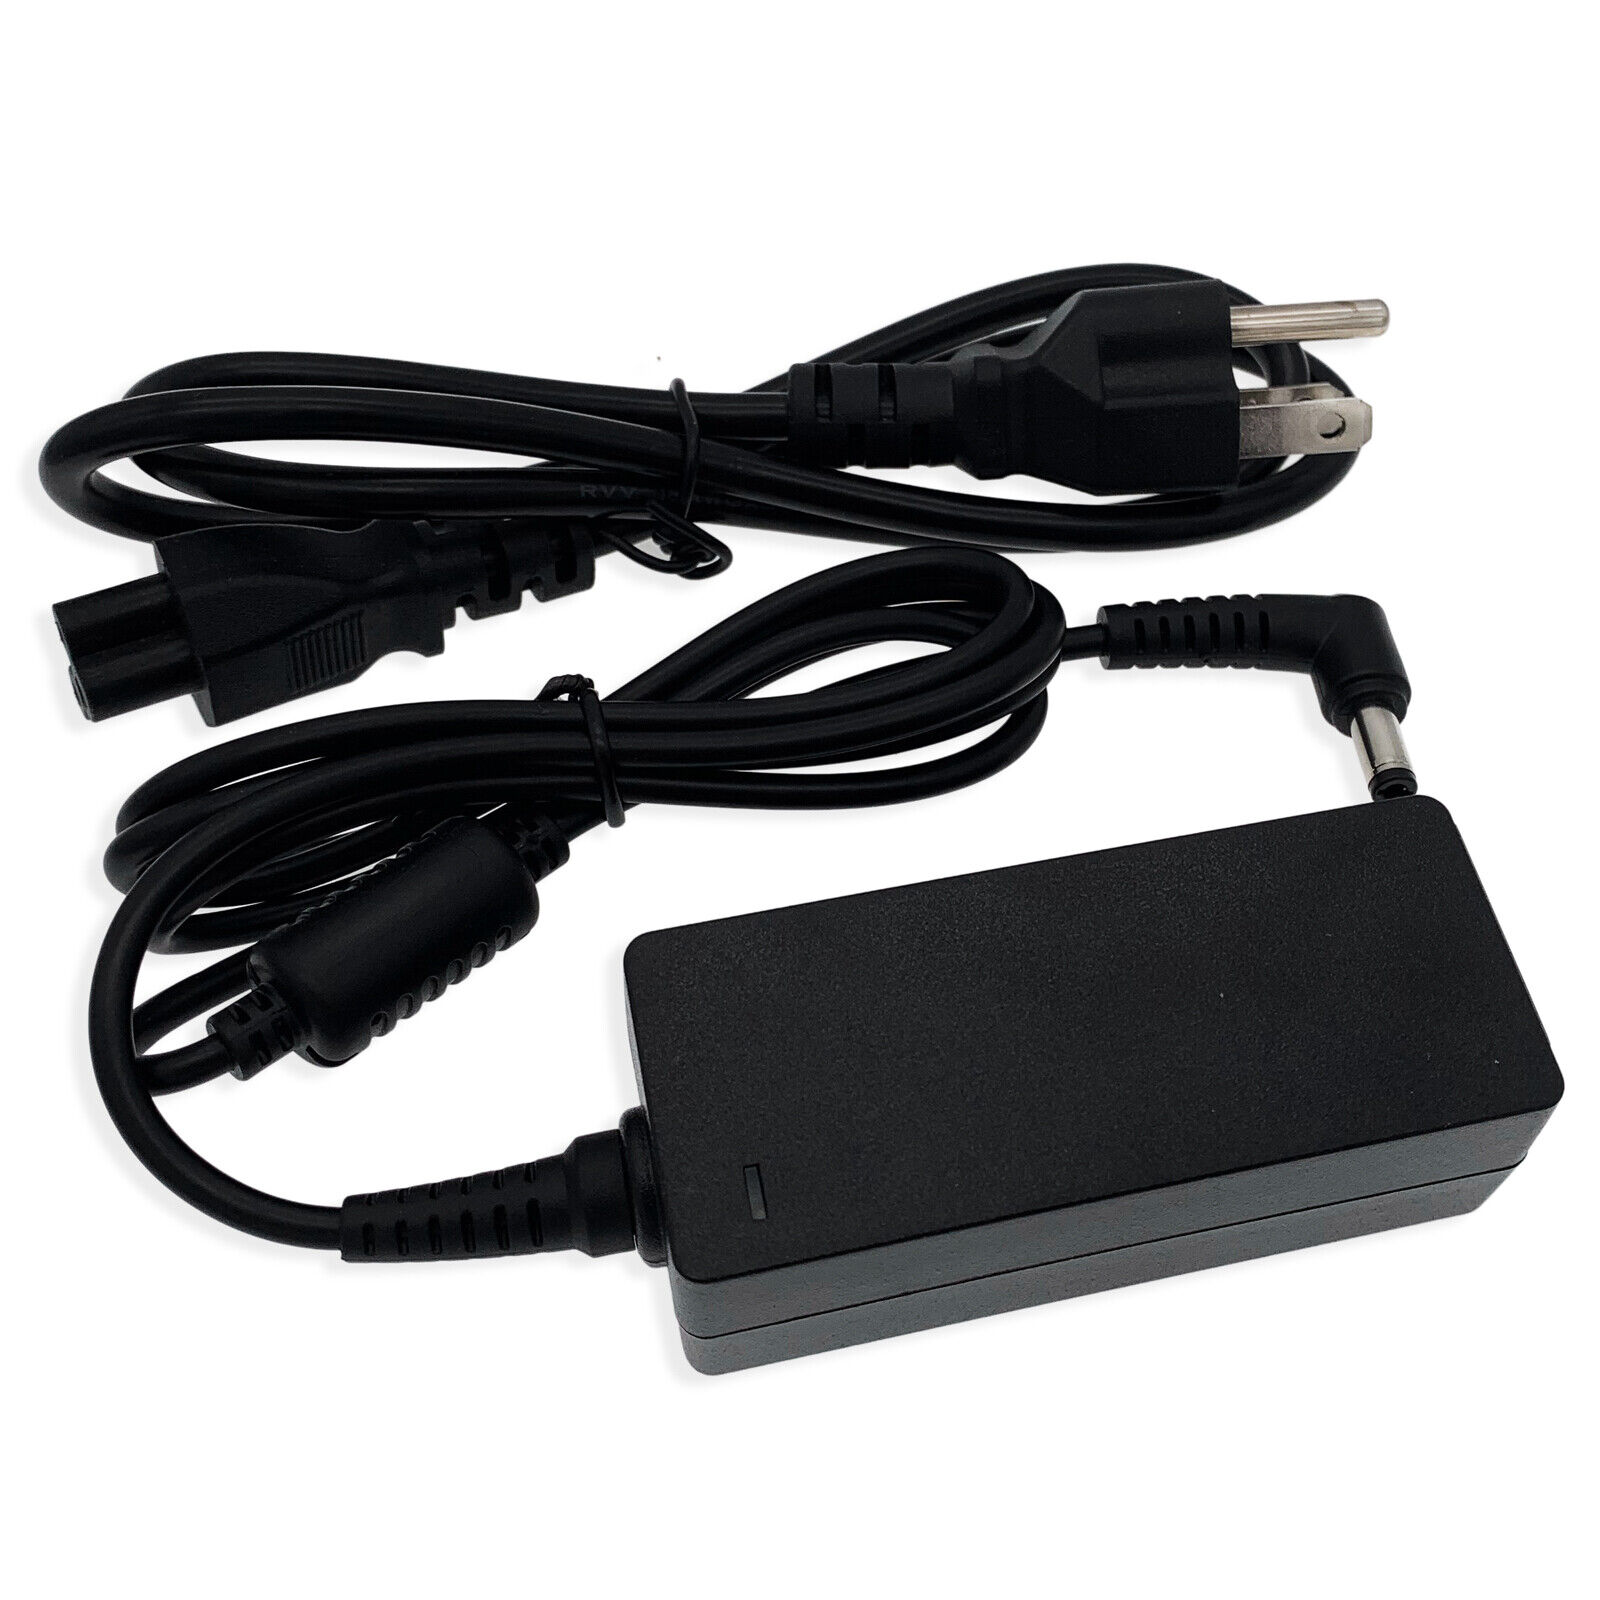 Power Adapter AC 100-240V Switching to DC 15V 90W 6A, LED Power Supply, for LED Strip Lights, RC Charger and Other Low V